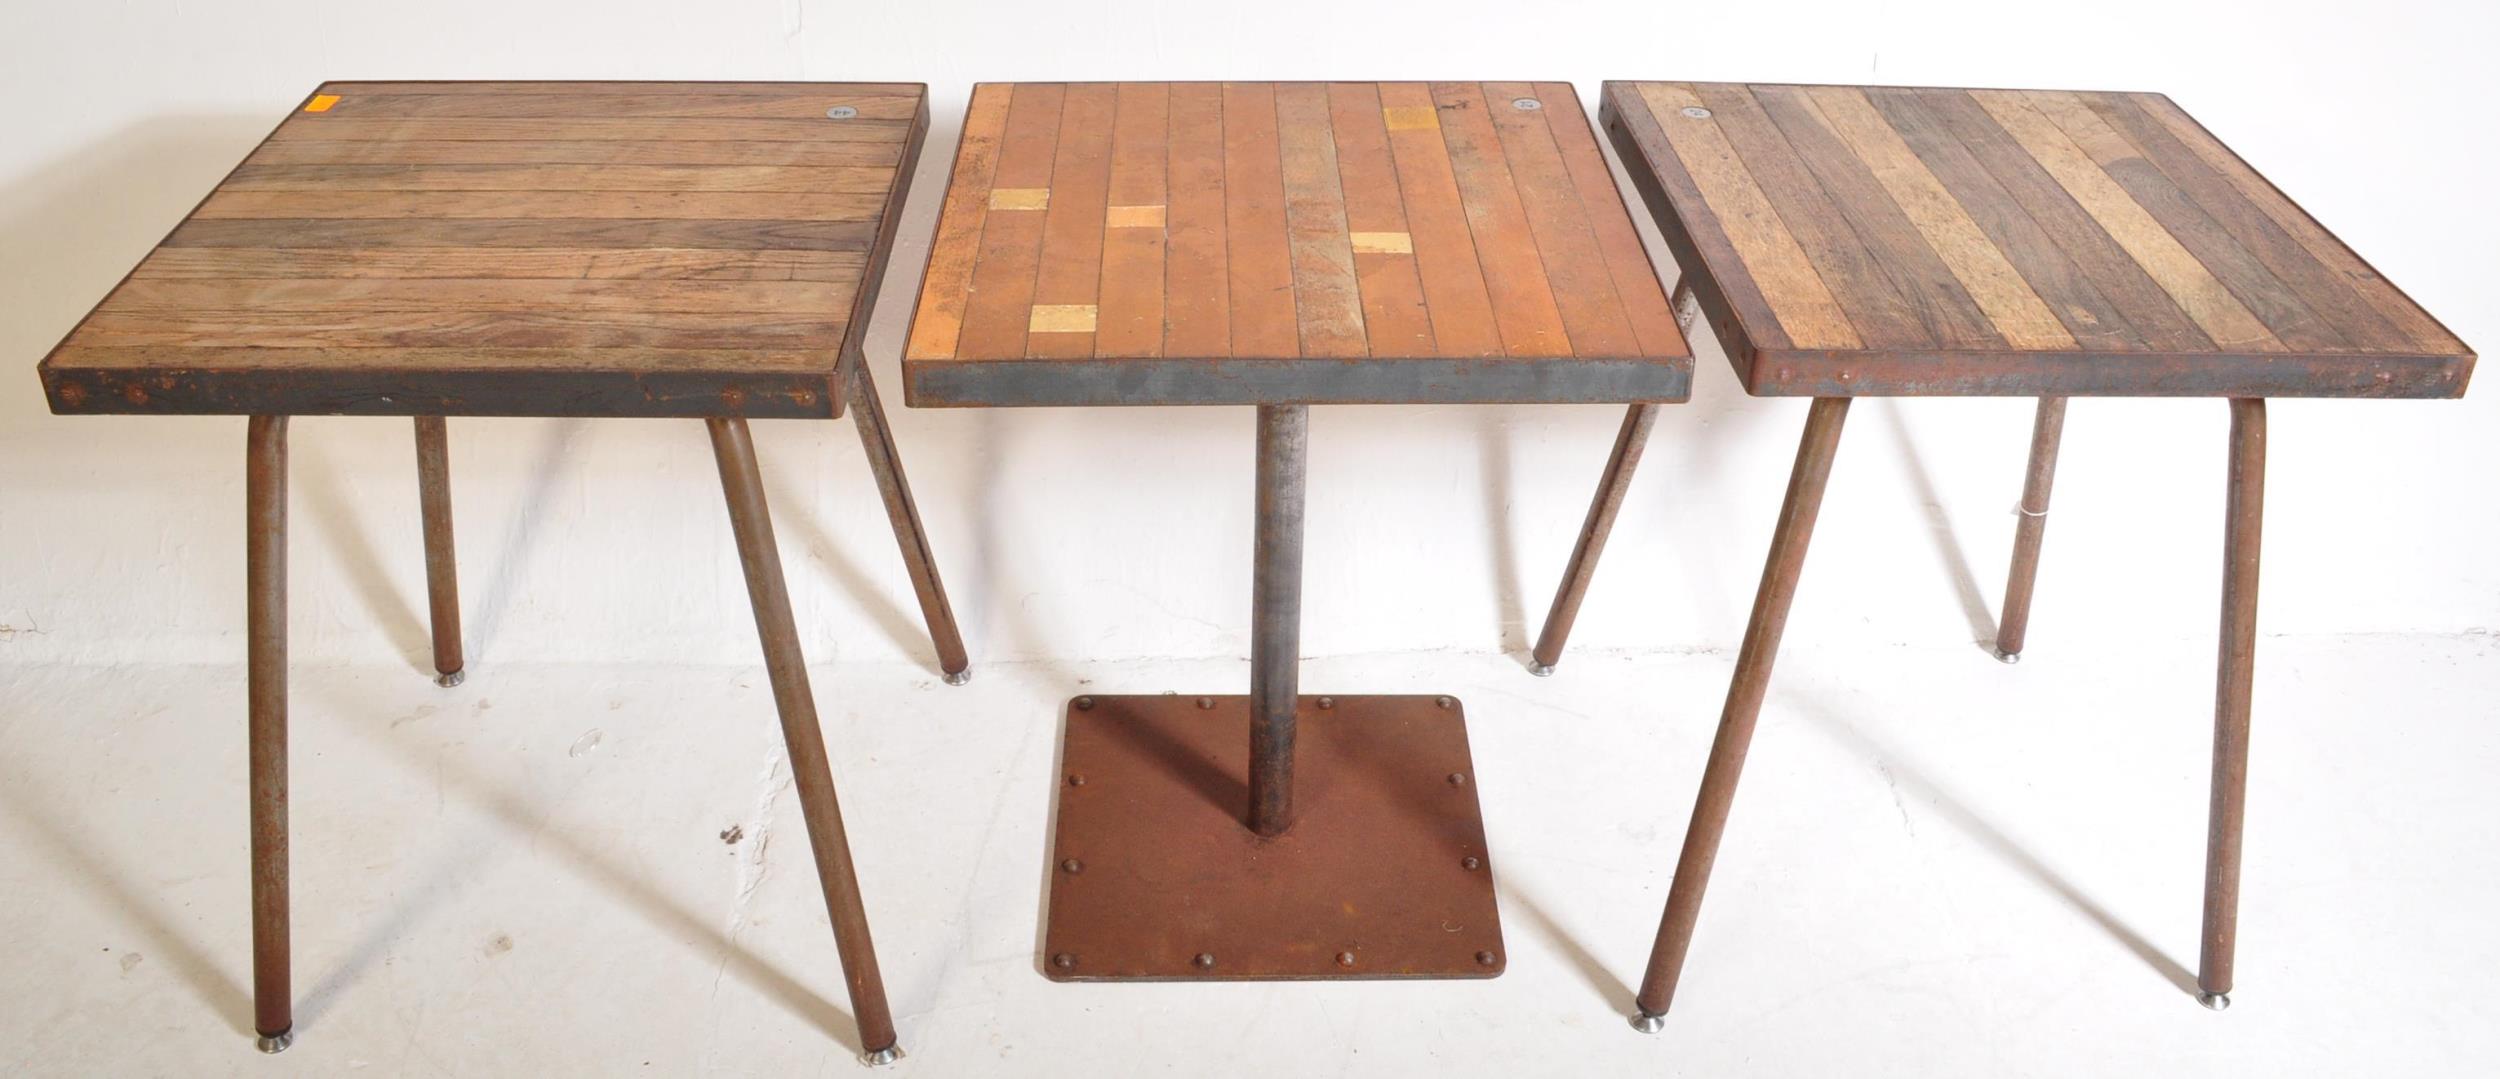 THREE CONTEMPORARY INDUSTRIAL CAFE / RESTAURANT TABLES